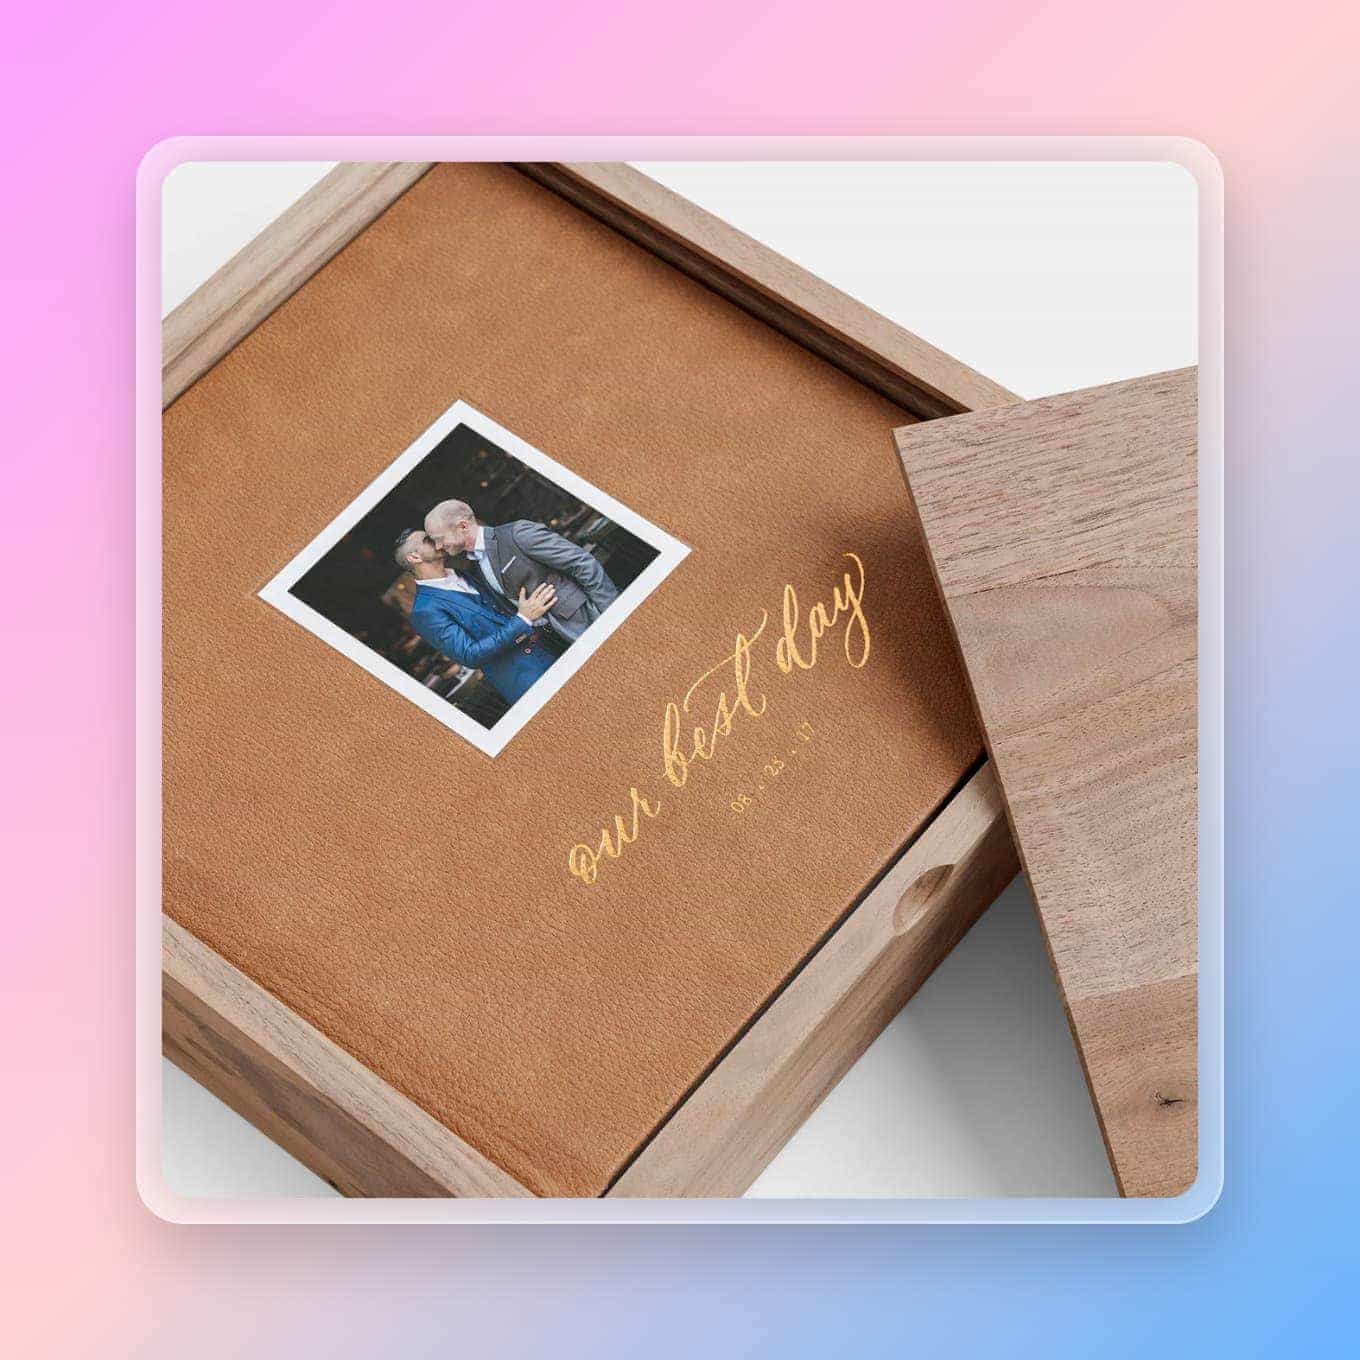 Front cover of a photo album, wrapped in a wooden box